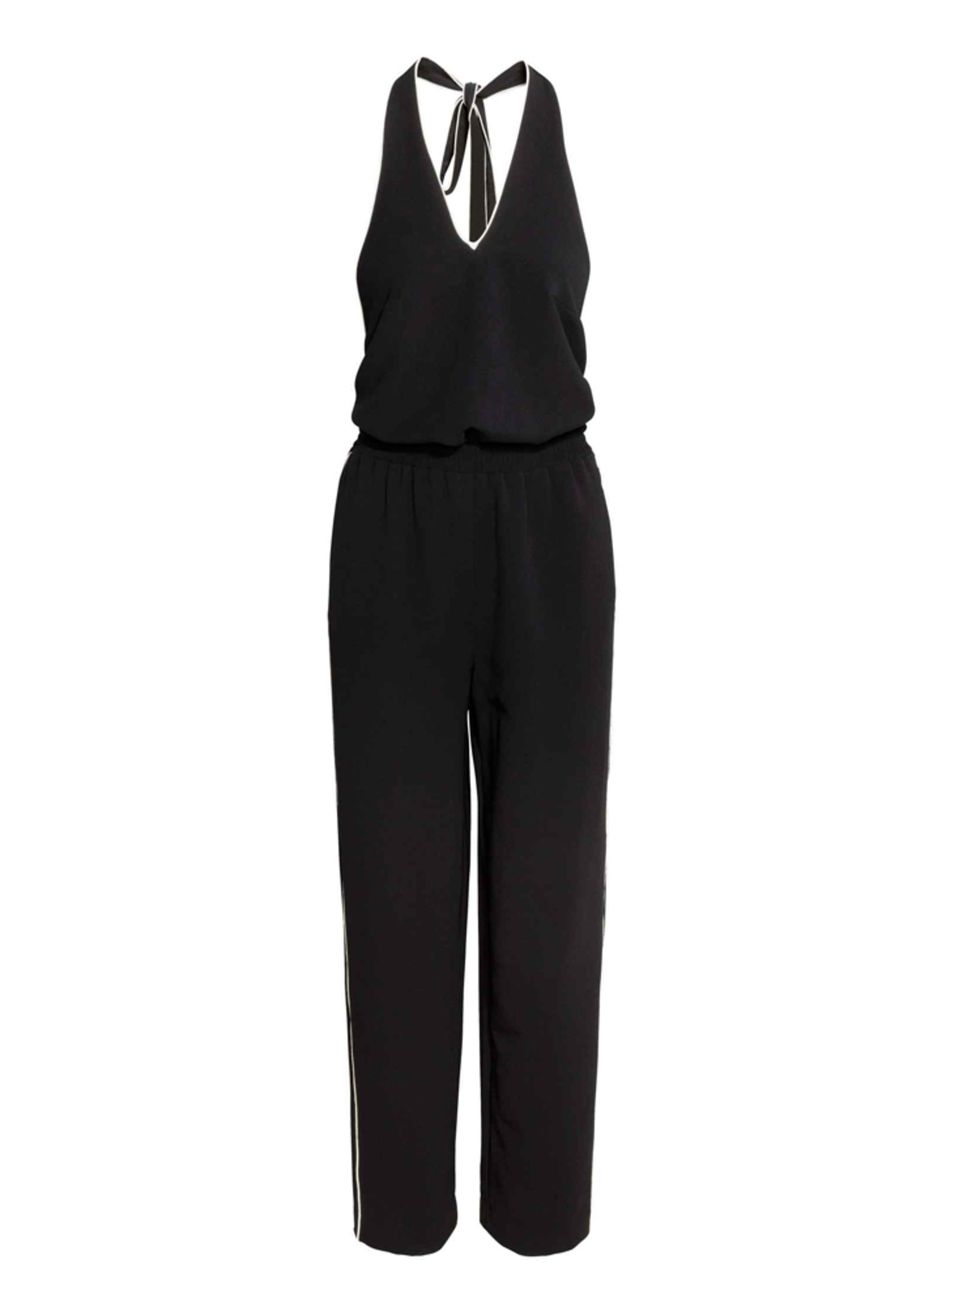 <p>Jumpsuit, <a href="http://www2.hm.com/en_gb/productpage.0399100001.html" target="_blank">£39.99</a></p>